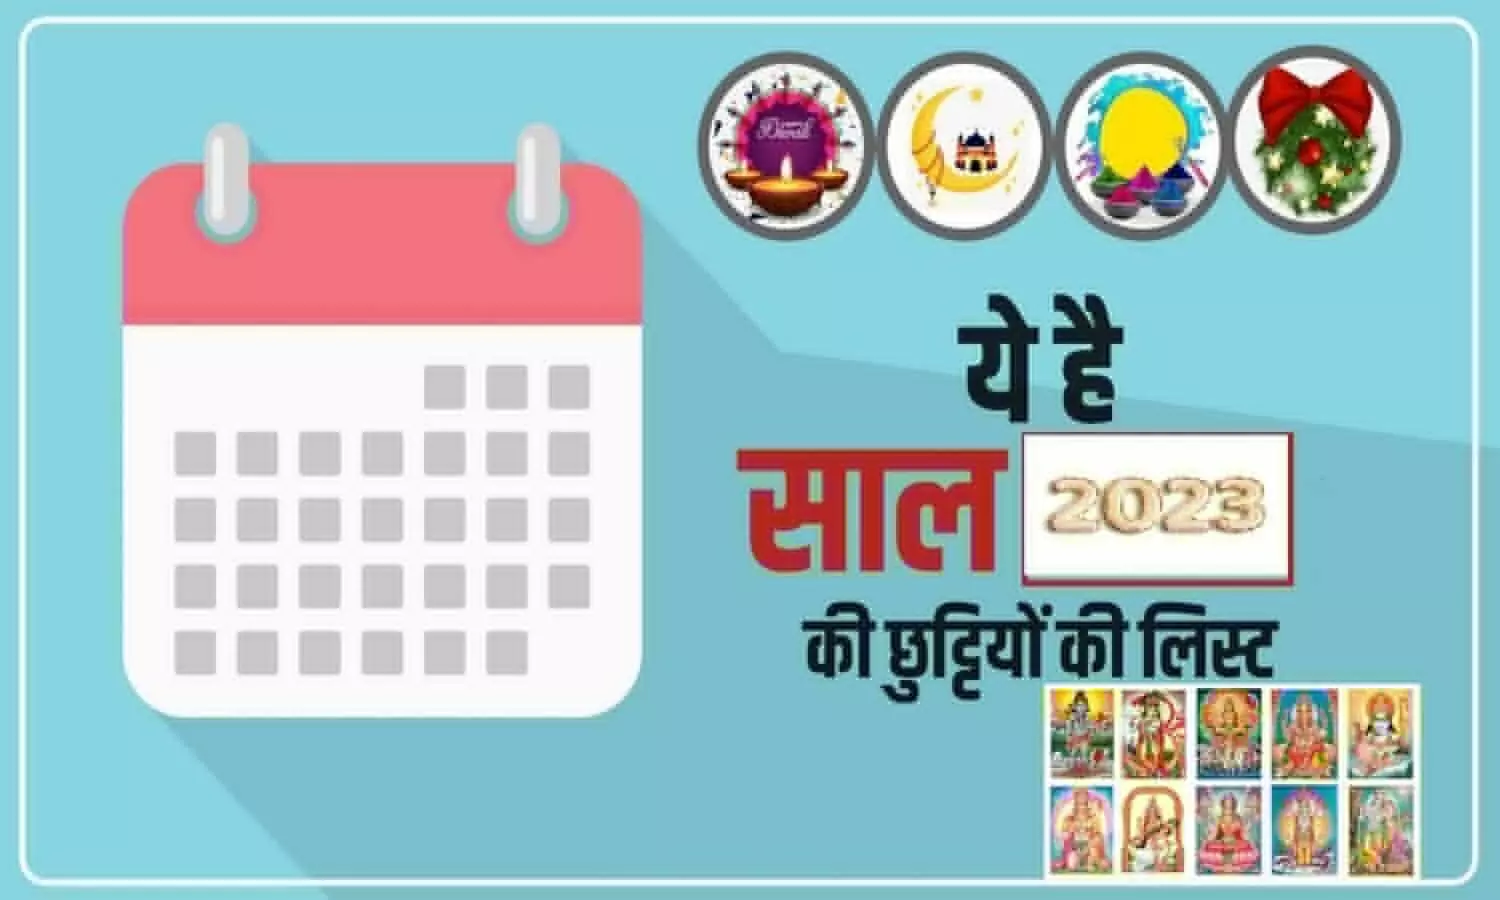 UP Holiday List 2023 Calendar in Holidays Deatils, UP Latest News in